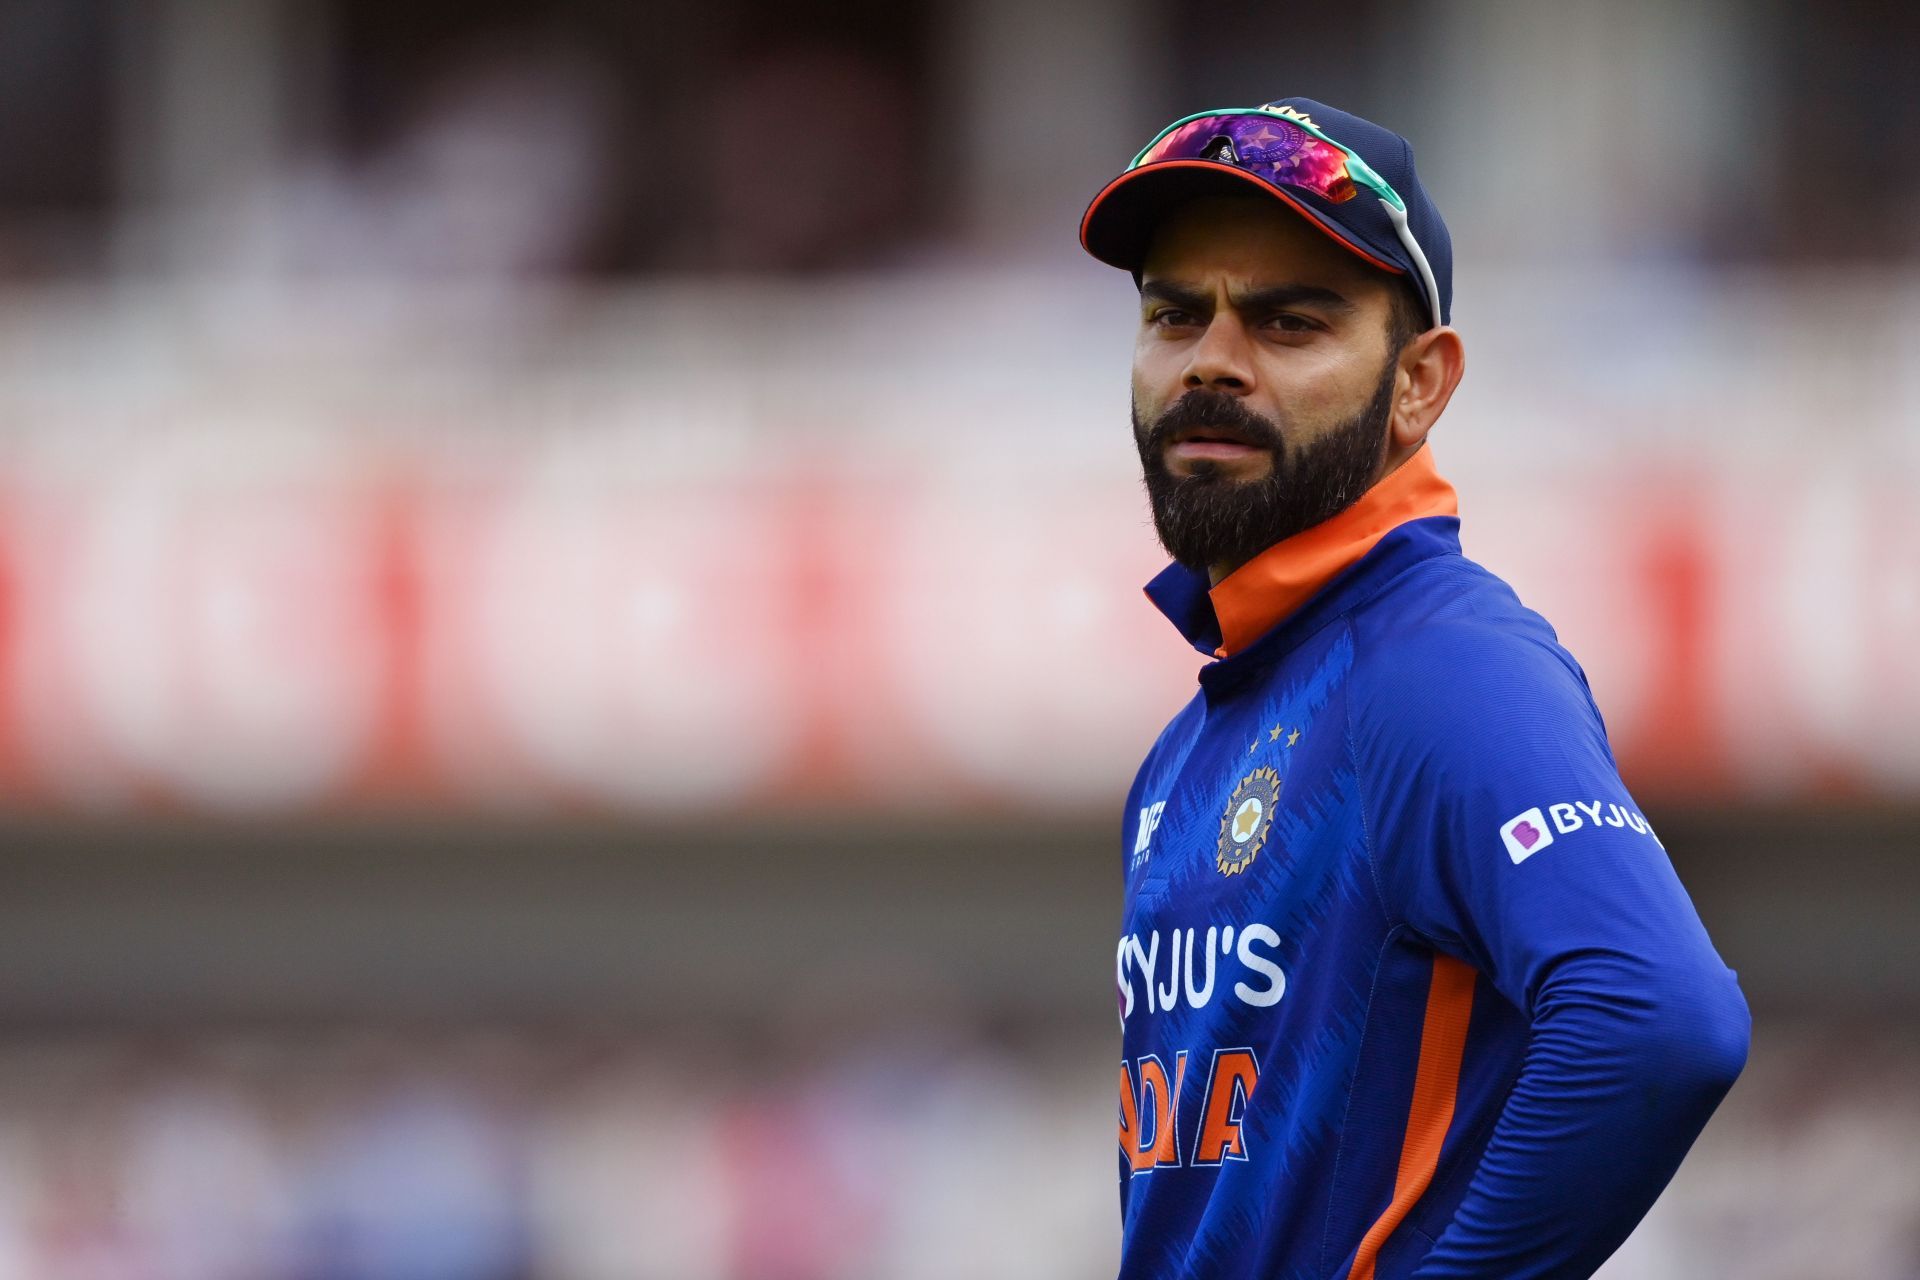 Virat Kohli is under some pressure due to his batting form. (Credits: Getty)